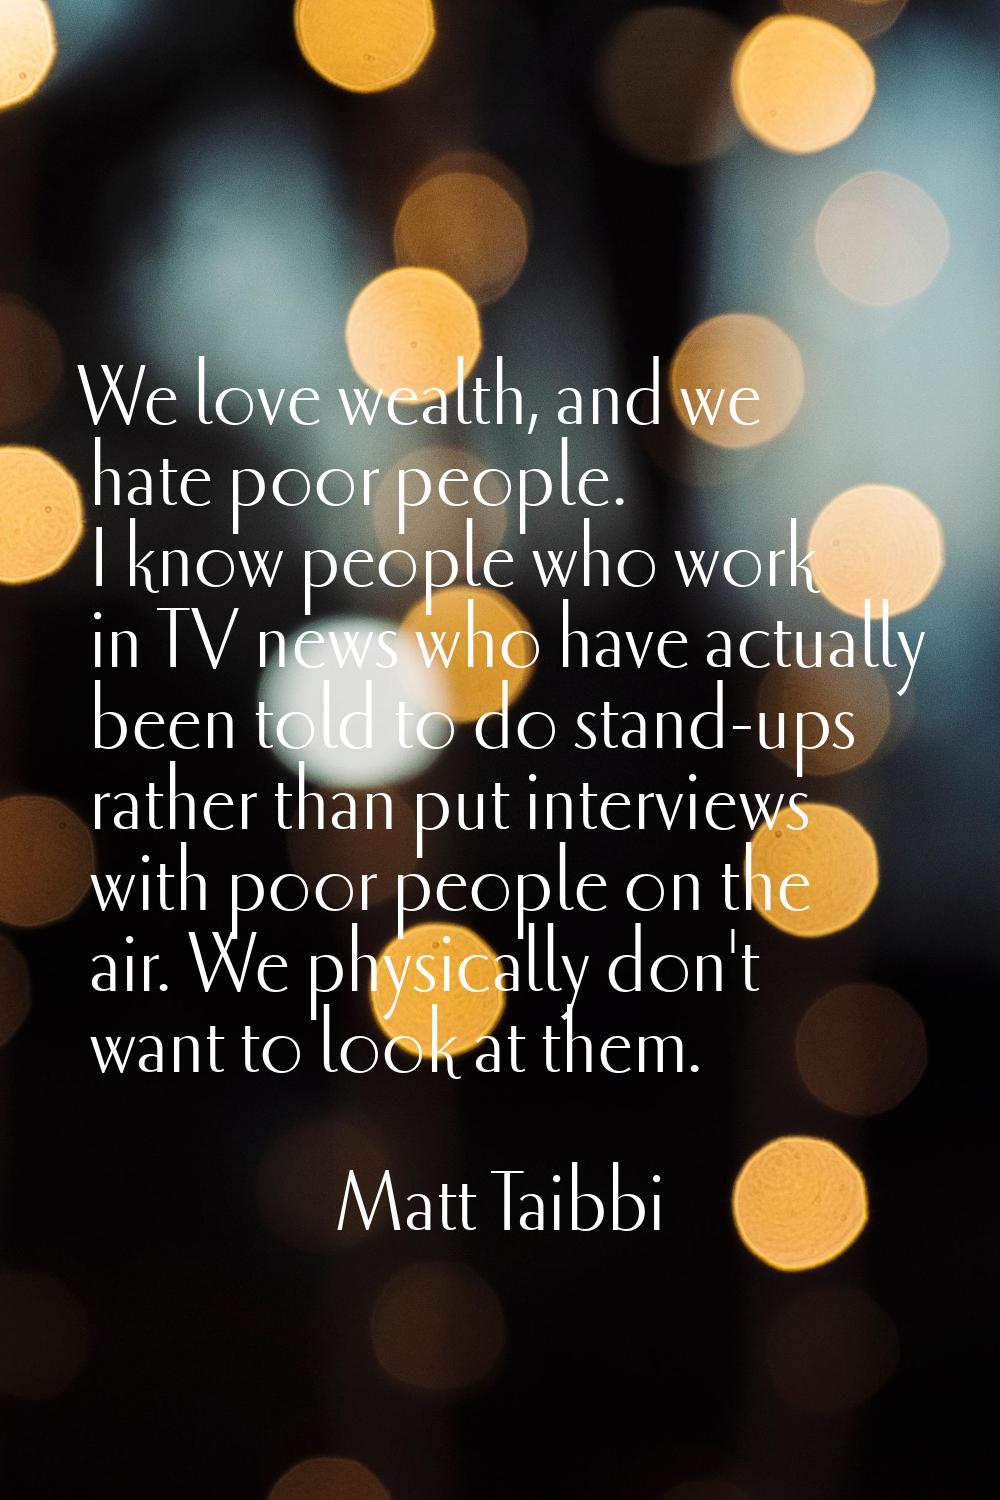 We love wealth, and we hate poor people. I know people who work in TV news who have actually been t